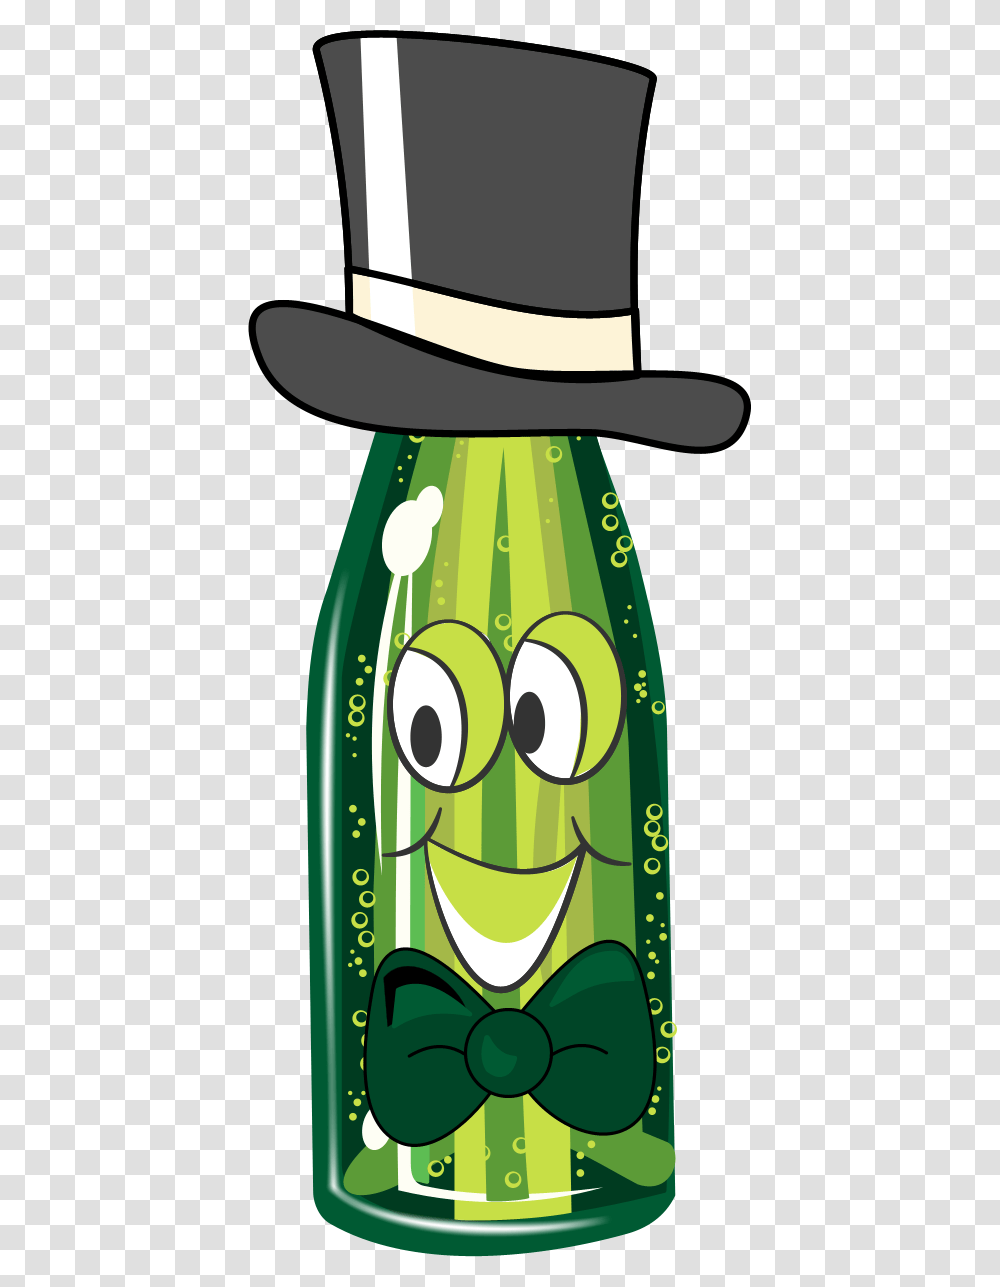 Free Champagne Bottle Cartoon Male Graphic Cartoon Champagne Bottle, Plant, Vegetable, Food, Produce Transparent Png